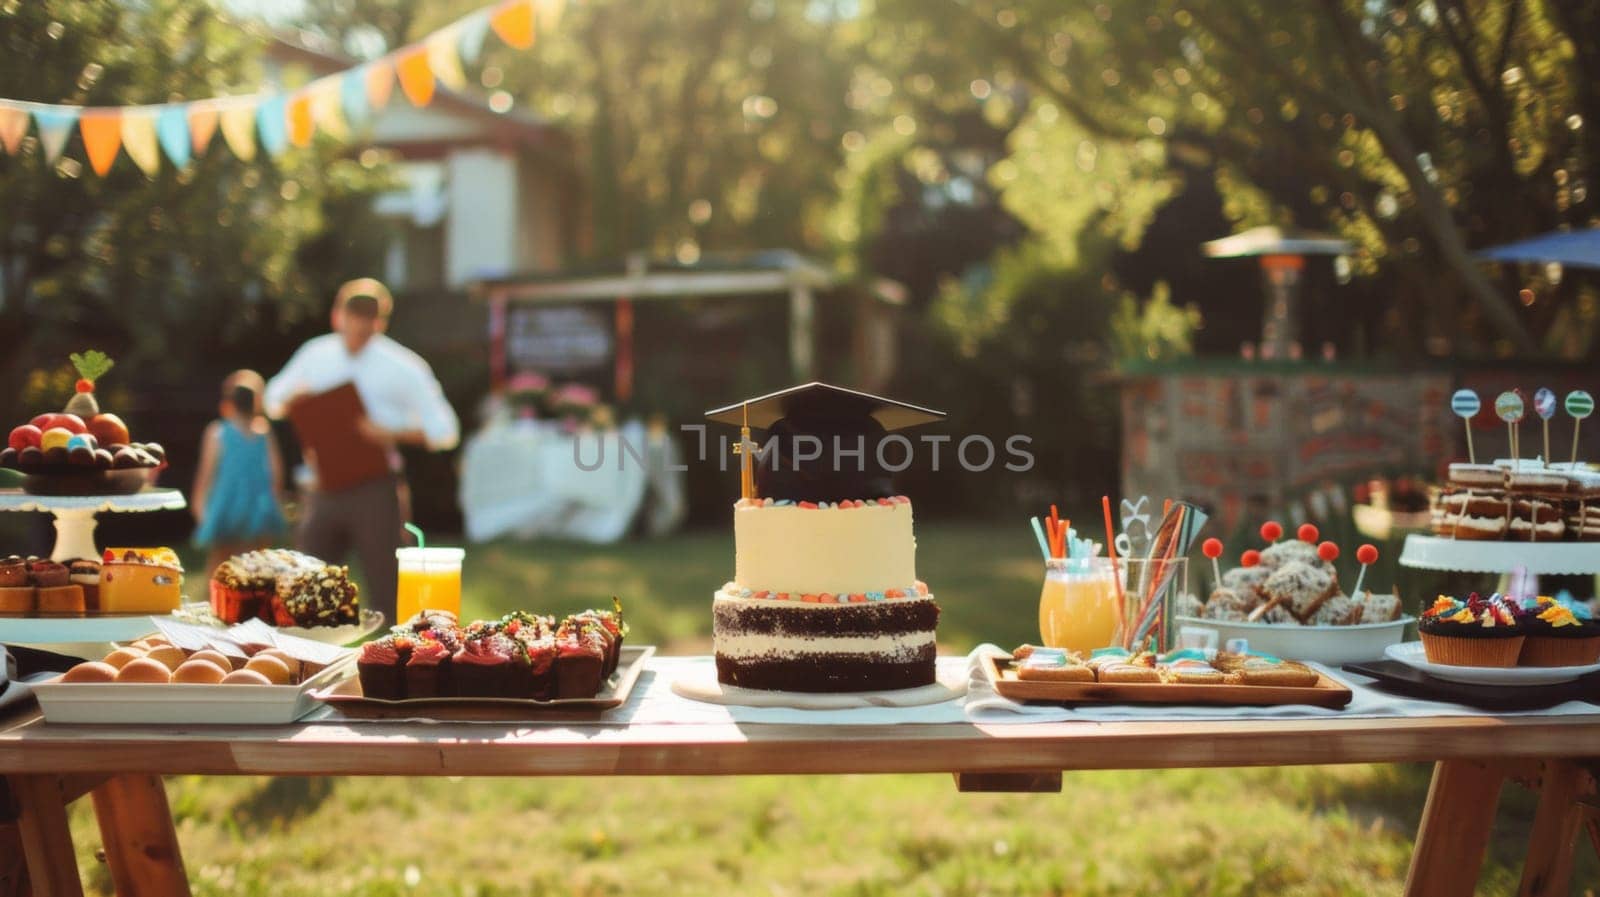 Graduation party outdoors in the garden during daylight in a sunny day. Cakes and deserts are ready.